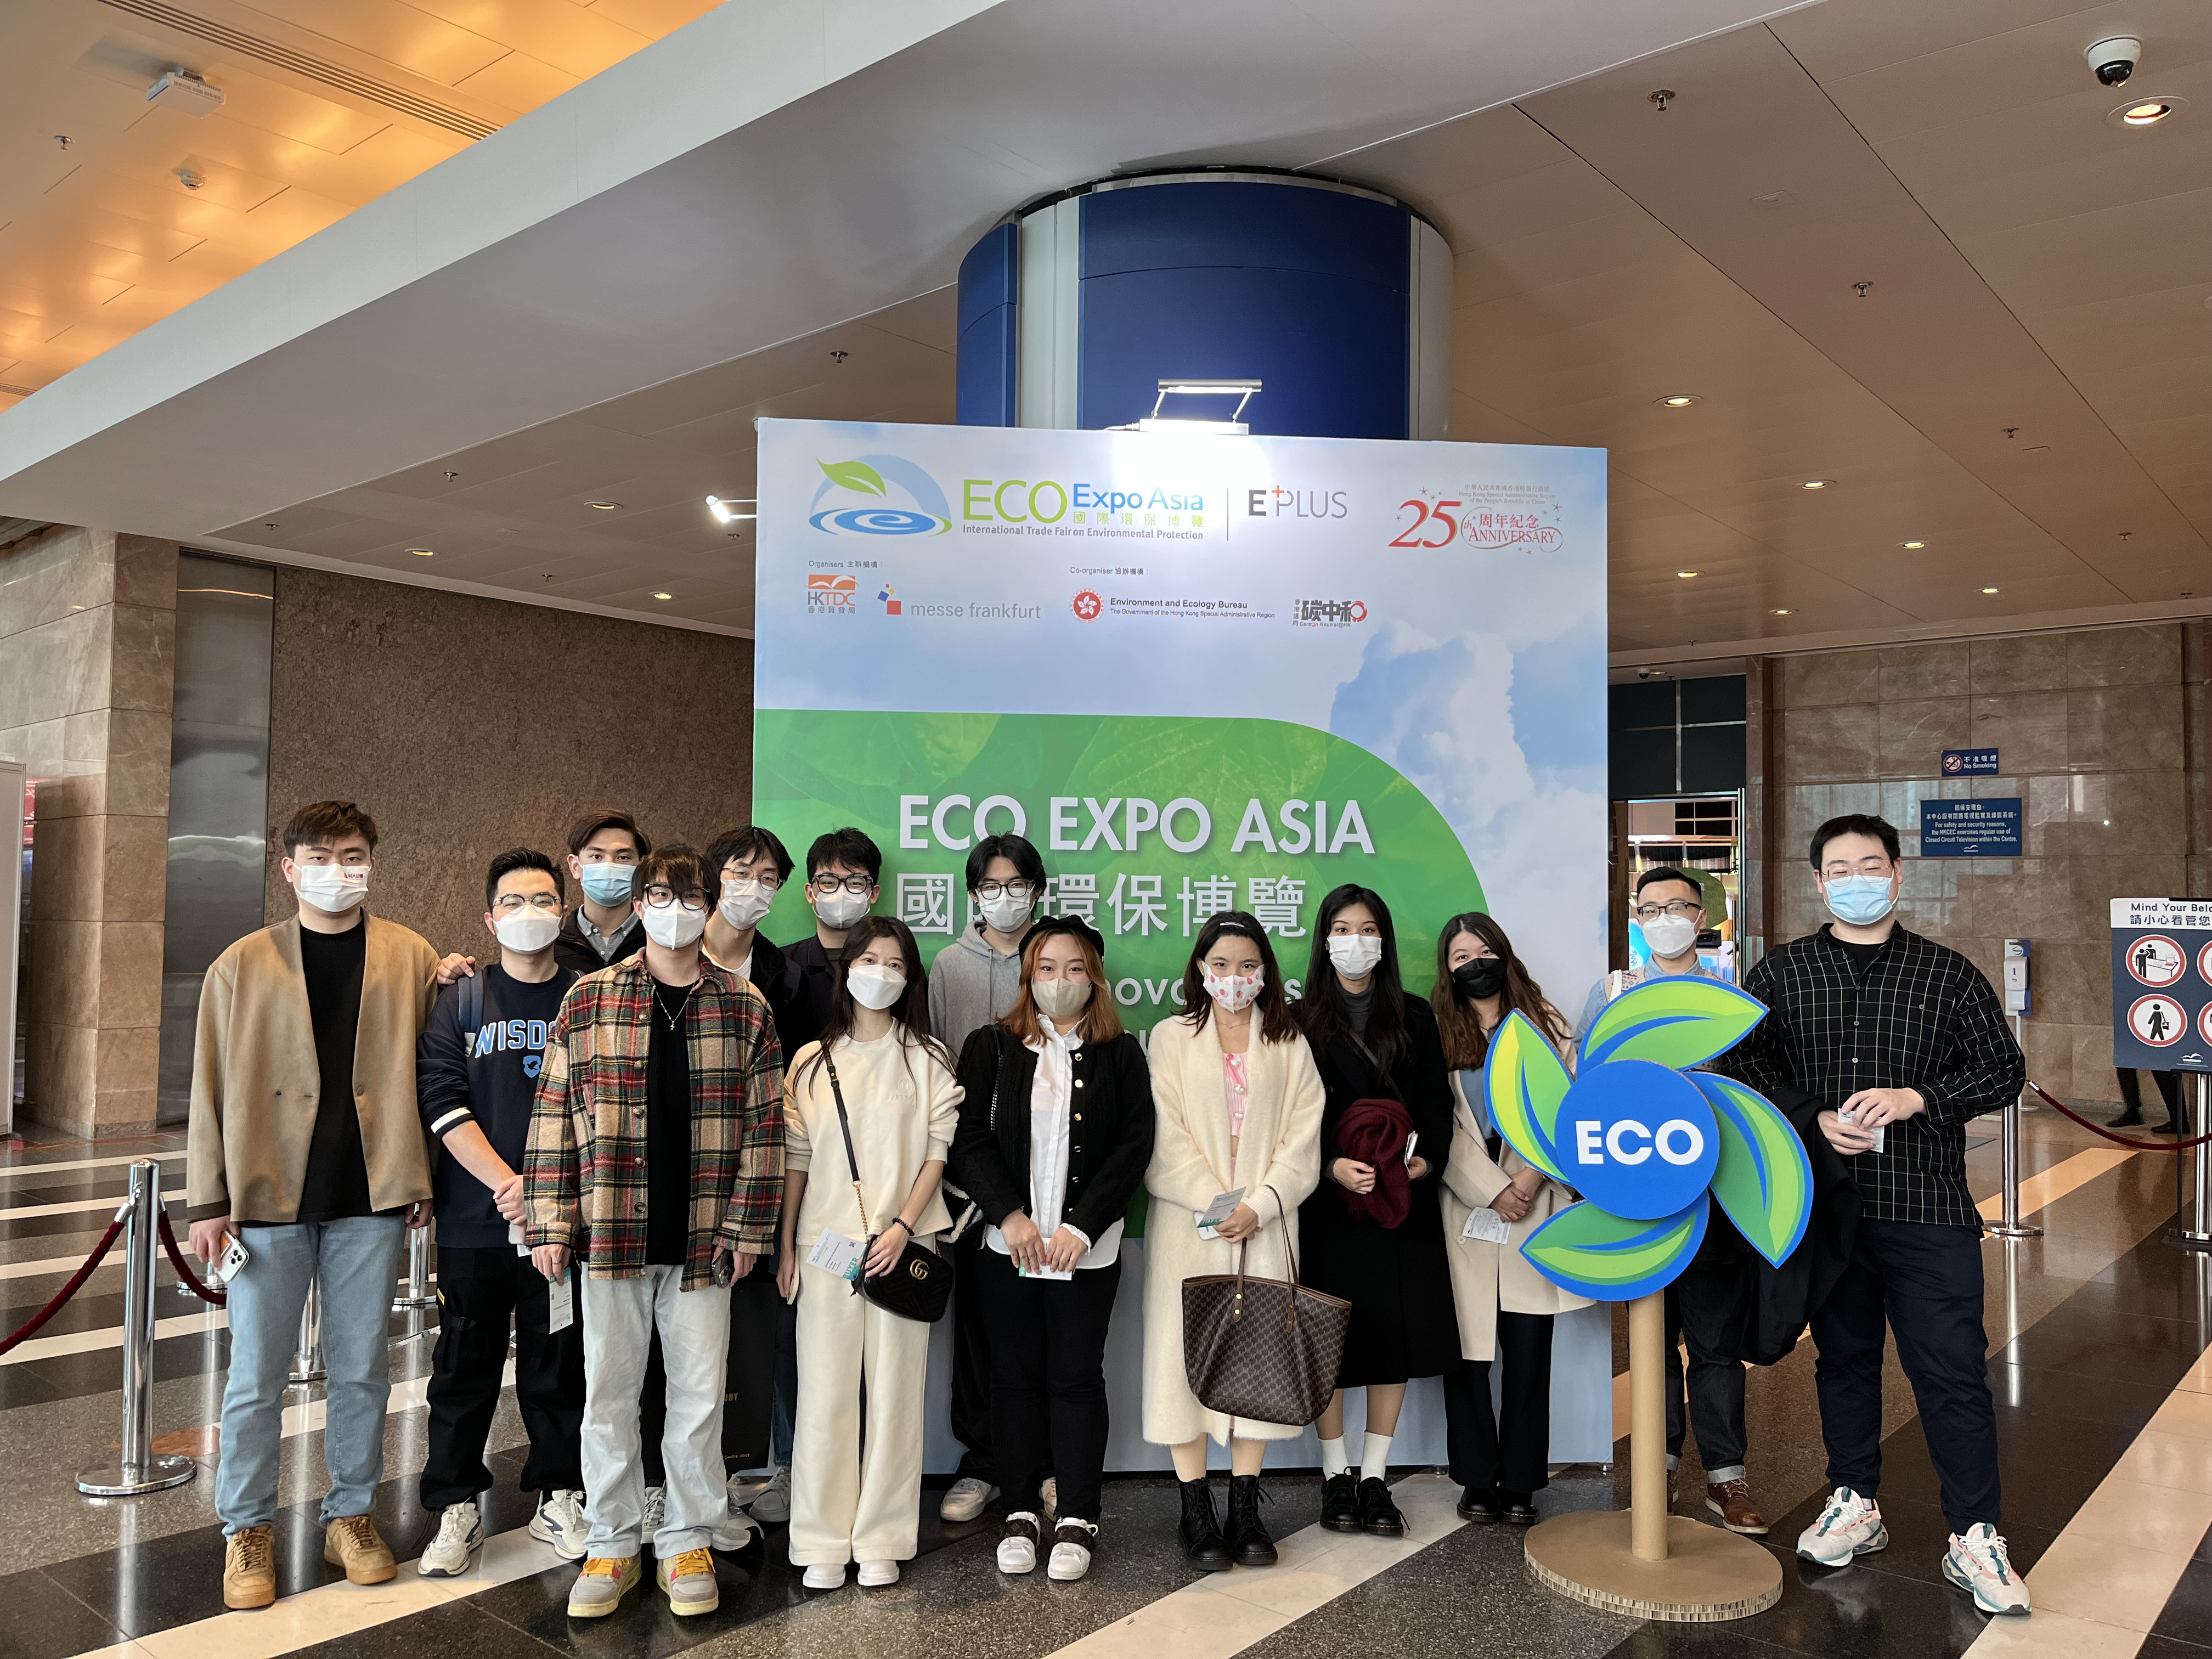 Visit to Eco Expo Asia